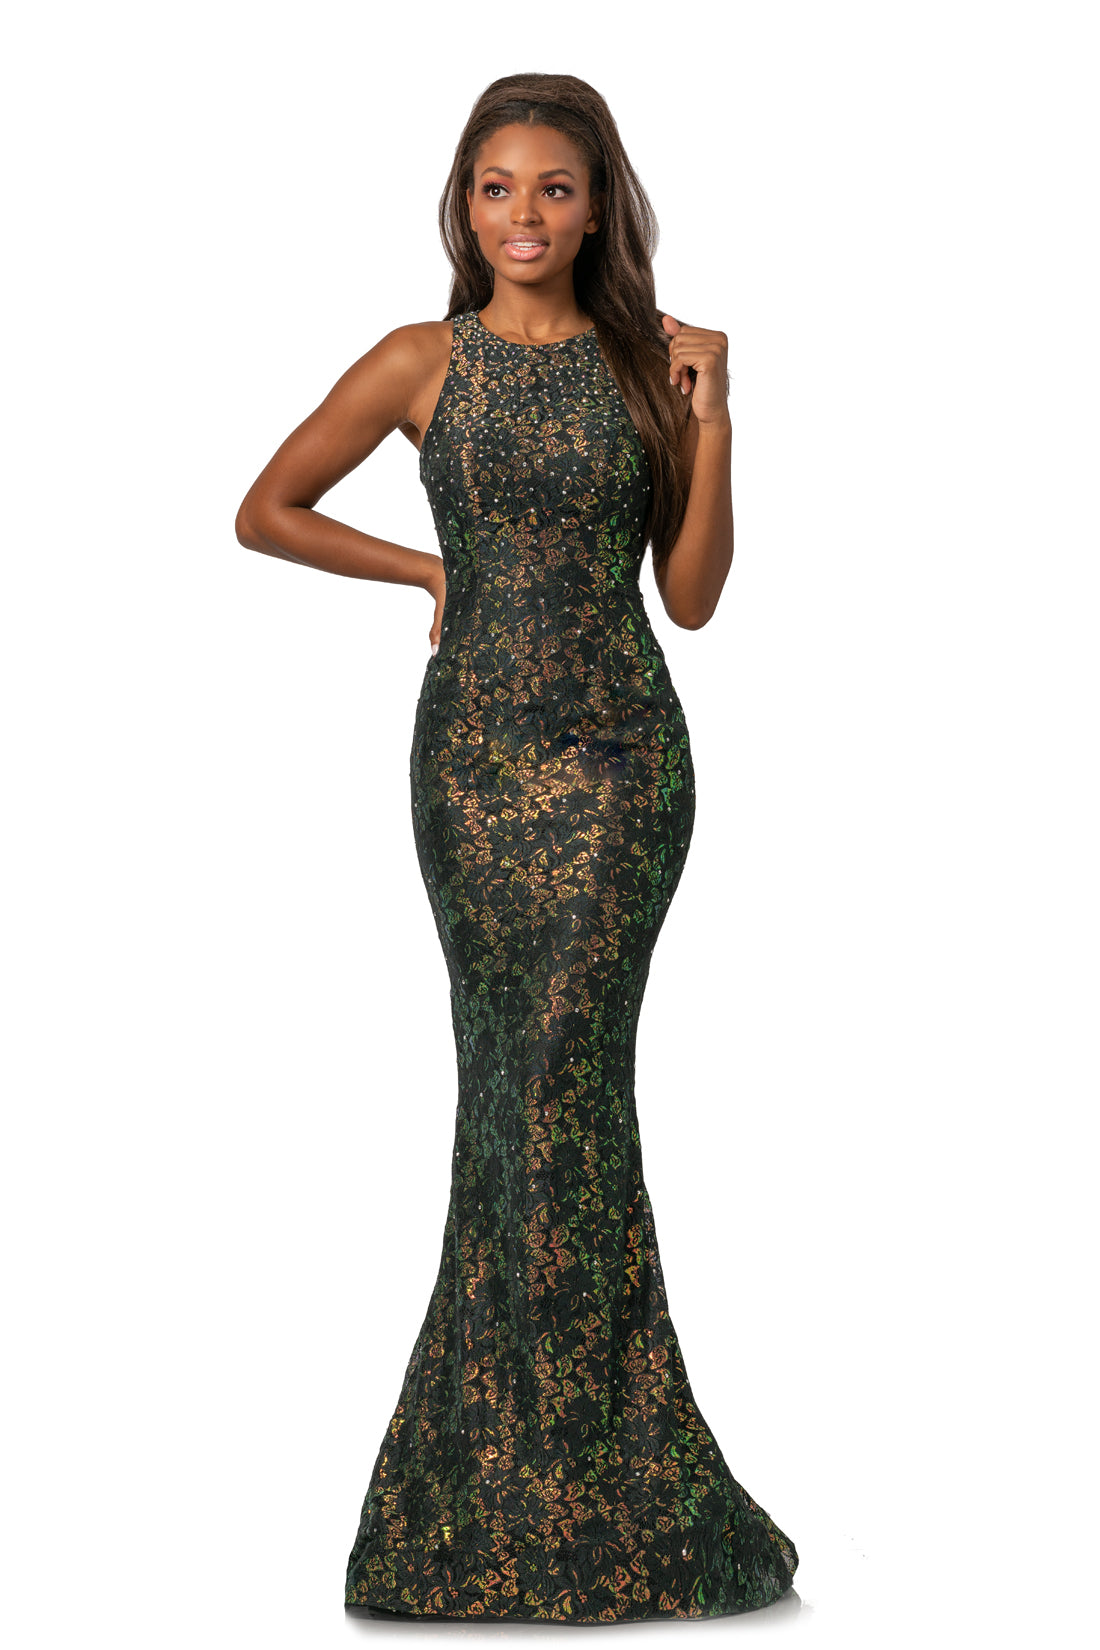 Johnathan Kayne 2036 is a long lace Prom Dress, Pageant Gown & Formal Evening Wear. This Long Fitted Gown Features Iridescent Metallic Shimmer Lace along the entire dress. Featuring a high neckline and beautiful Open Cutout back. Embellished with scattered crystals along the bodice. Subtle Fit & Flare Silhouette with a stage worthy sweeping train!